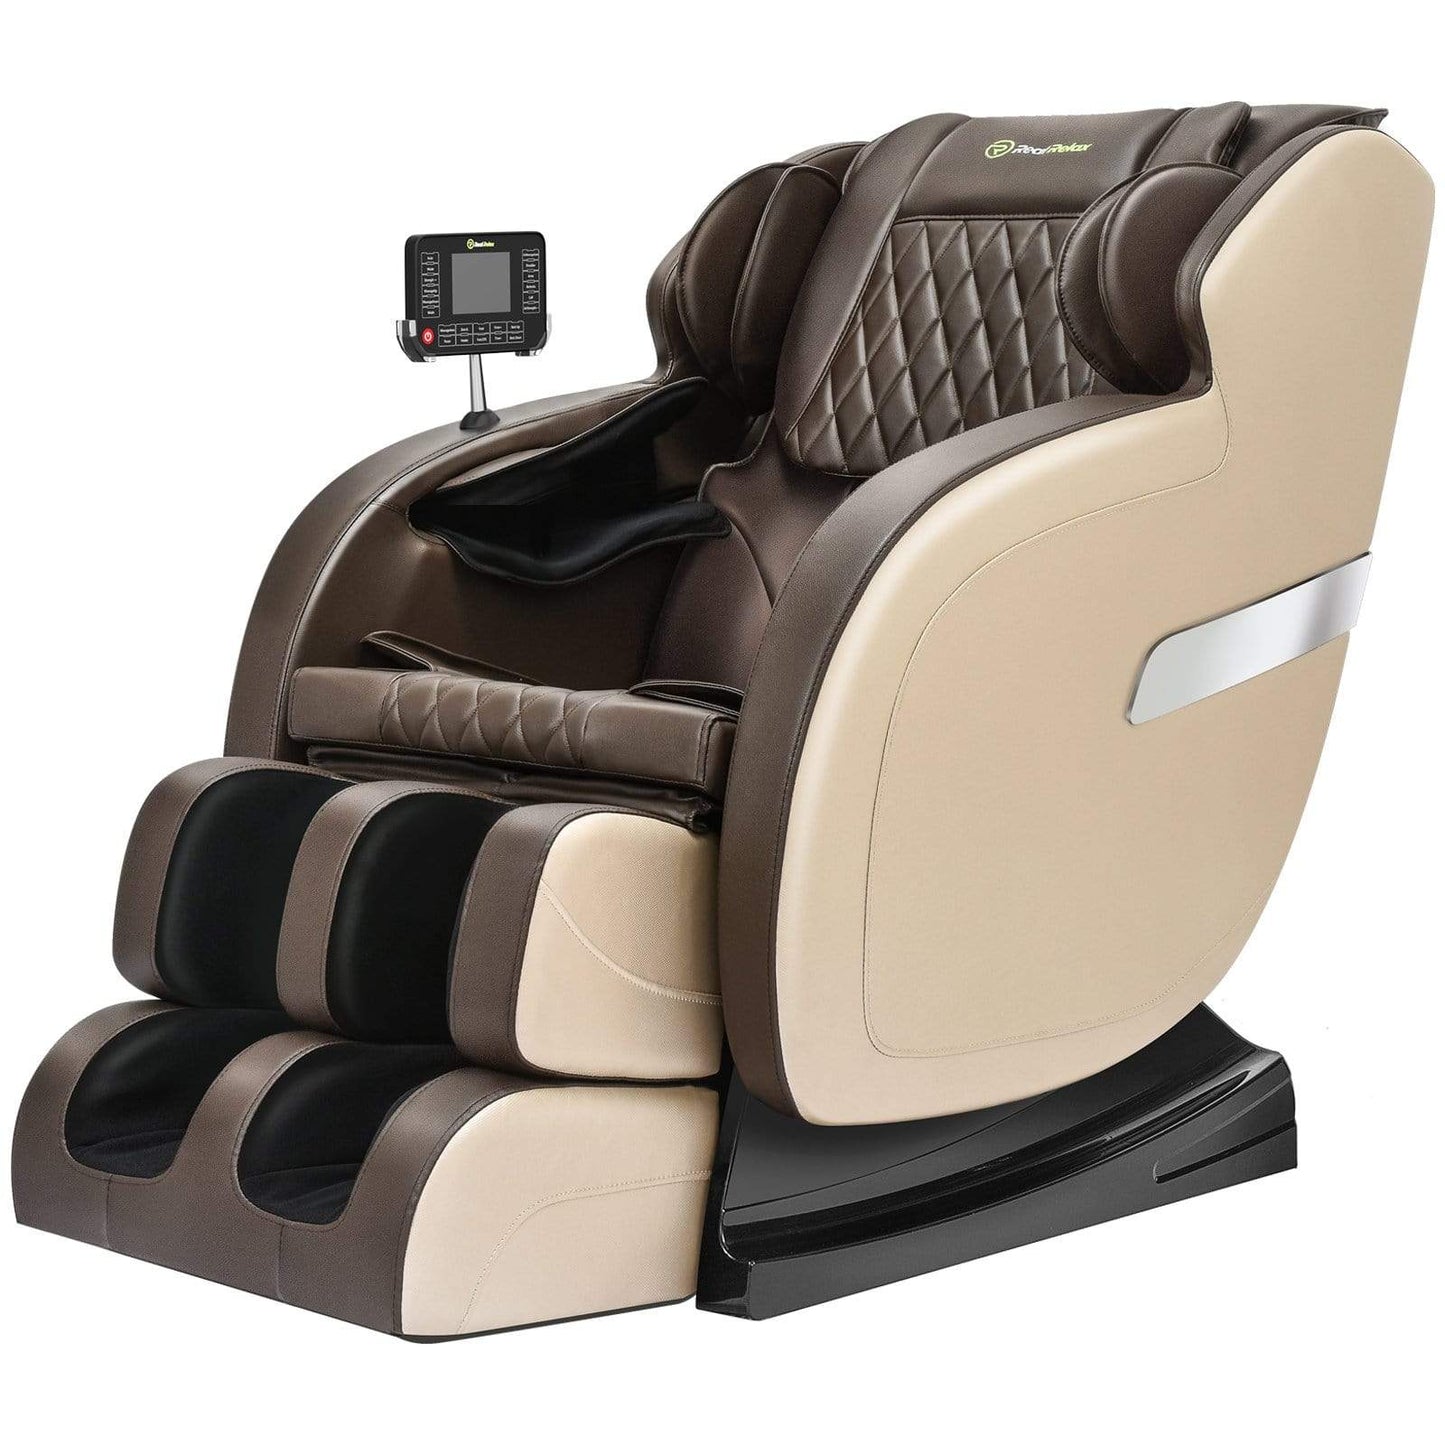 Real Relax Massage Chair Real Relax® Favor-05  Massage Chair Khaki